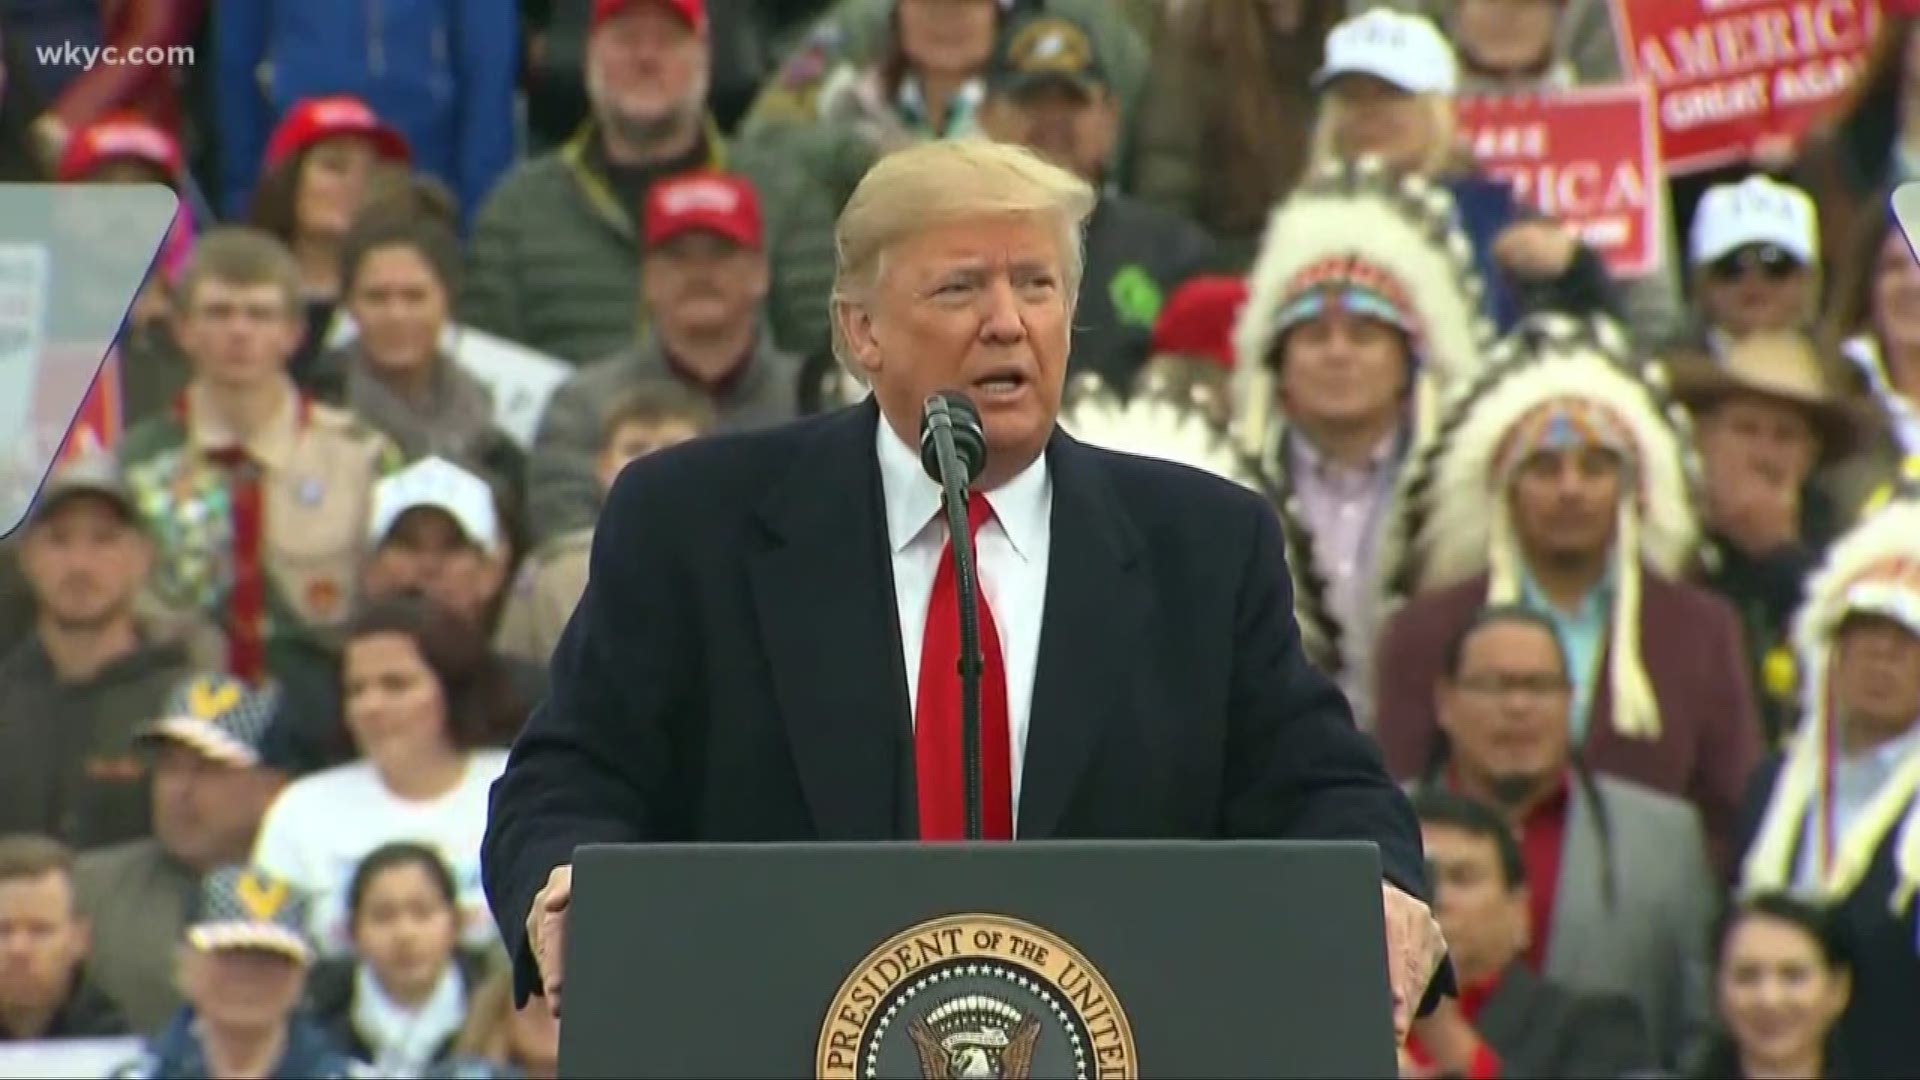 Nov. 5, 2018: As the final push to the midterm elections continues, President Donald Trump is holding a campaign stop in Cleveland.